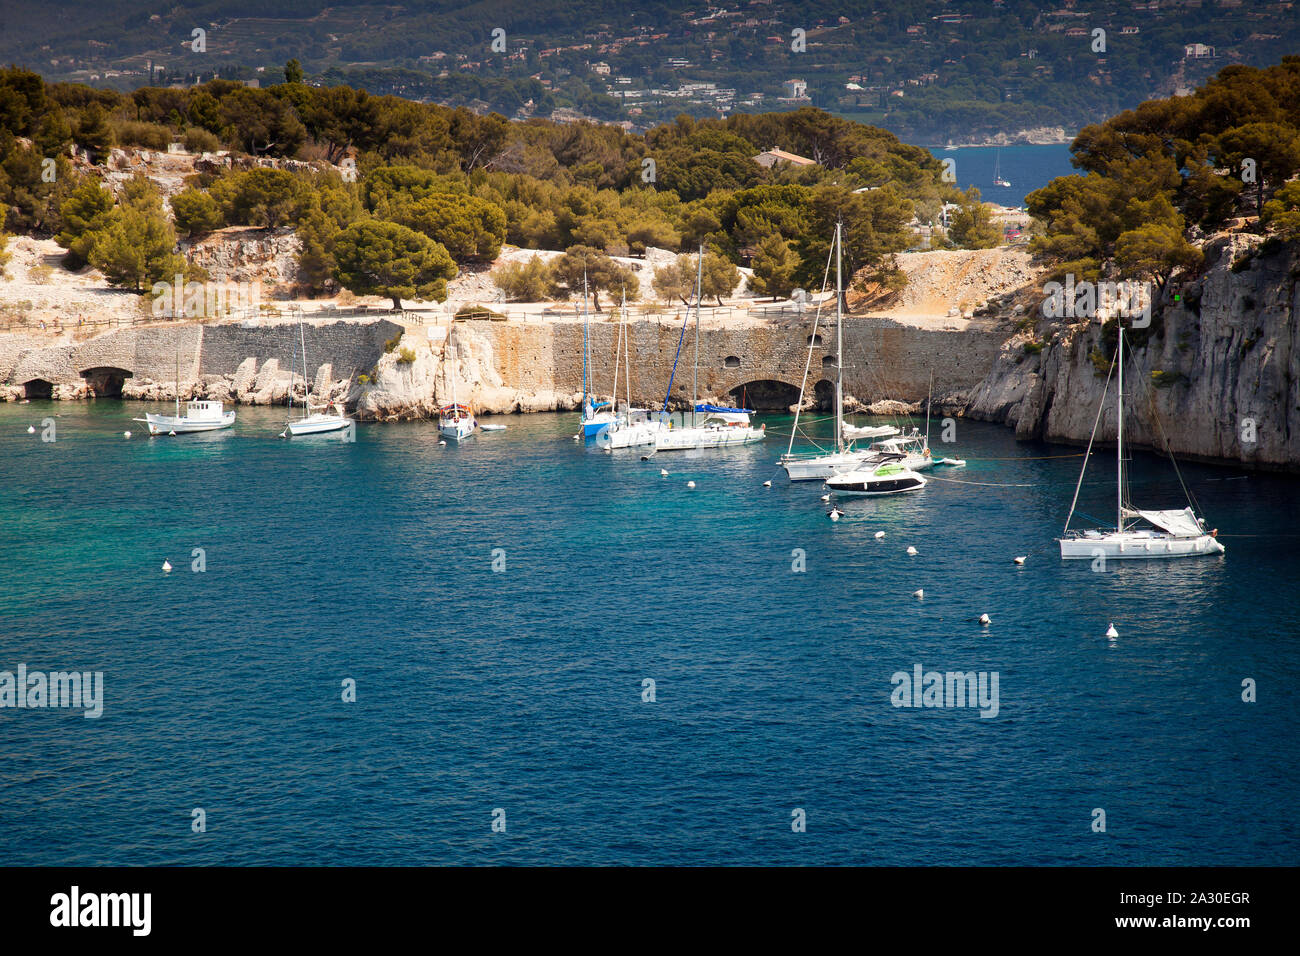 Segelboote ankern  in einer Bucht derFelsenküste, Calanque de Port Pin, Provence, Frankreich, Europa| Sailboats moored in a bay of the rocky coast, Ca Stock Photo